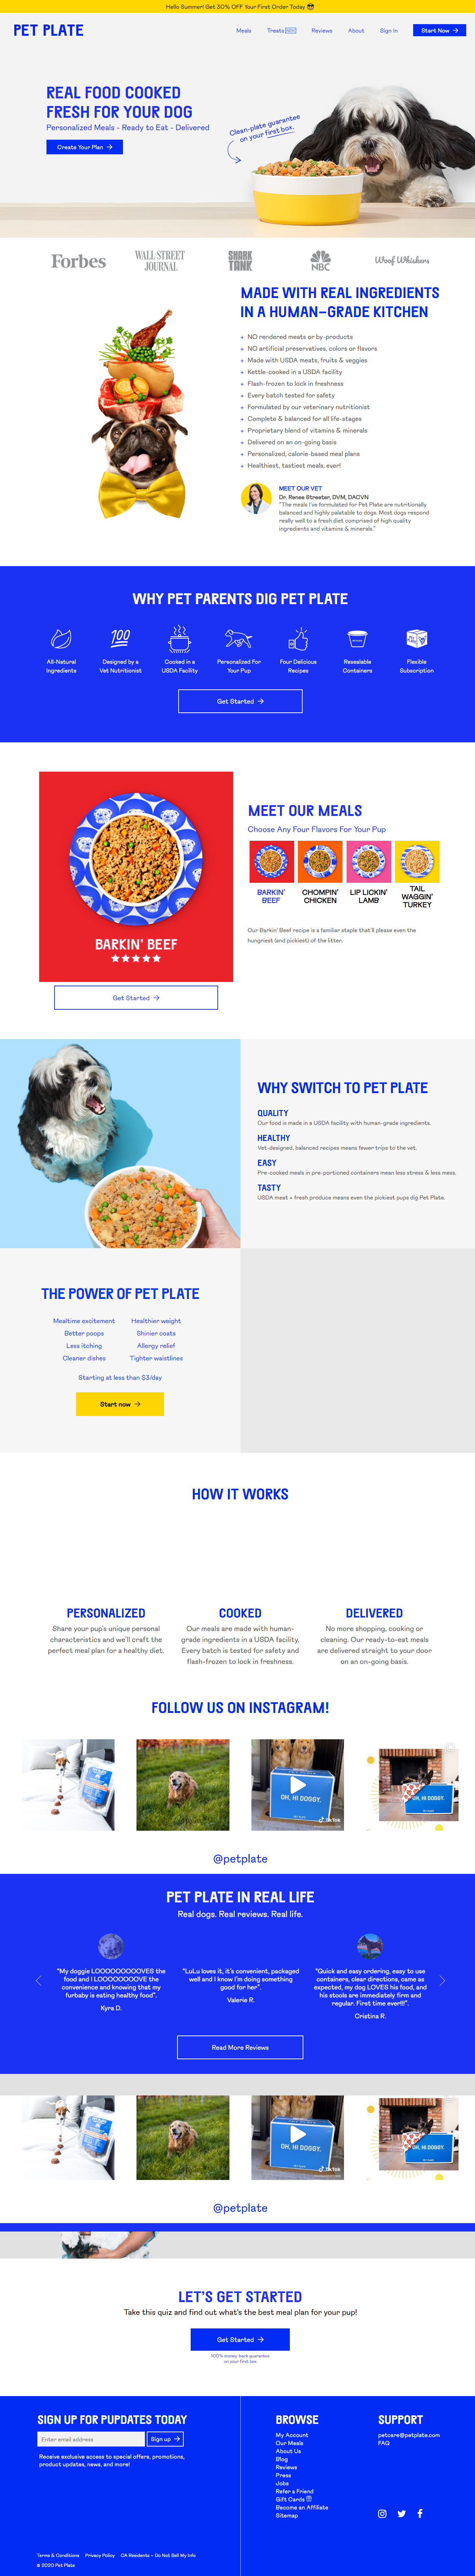 Fresh Dog Food Delivery   Pet Plate.png